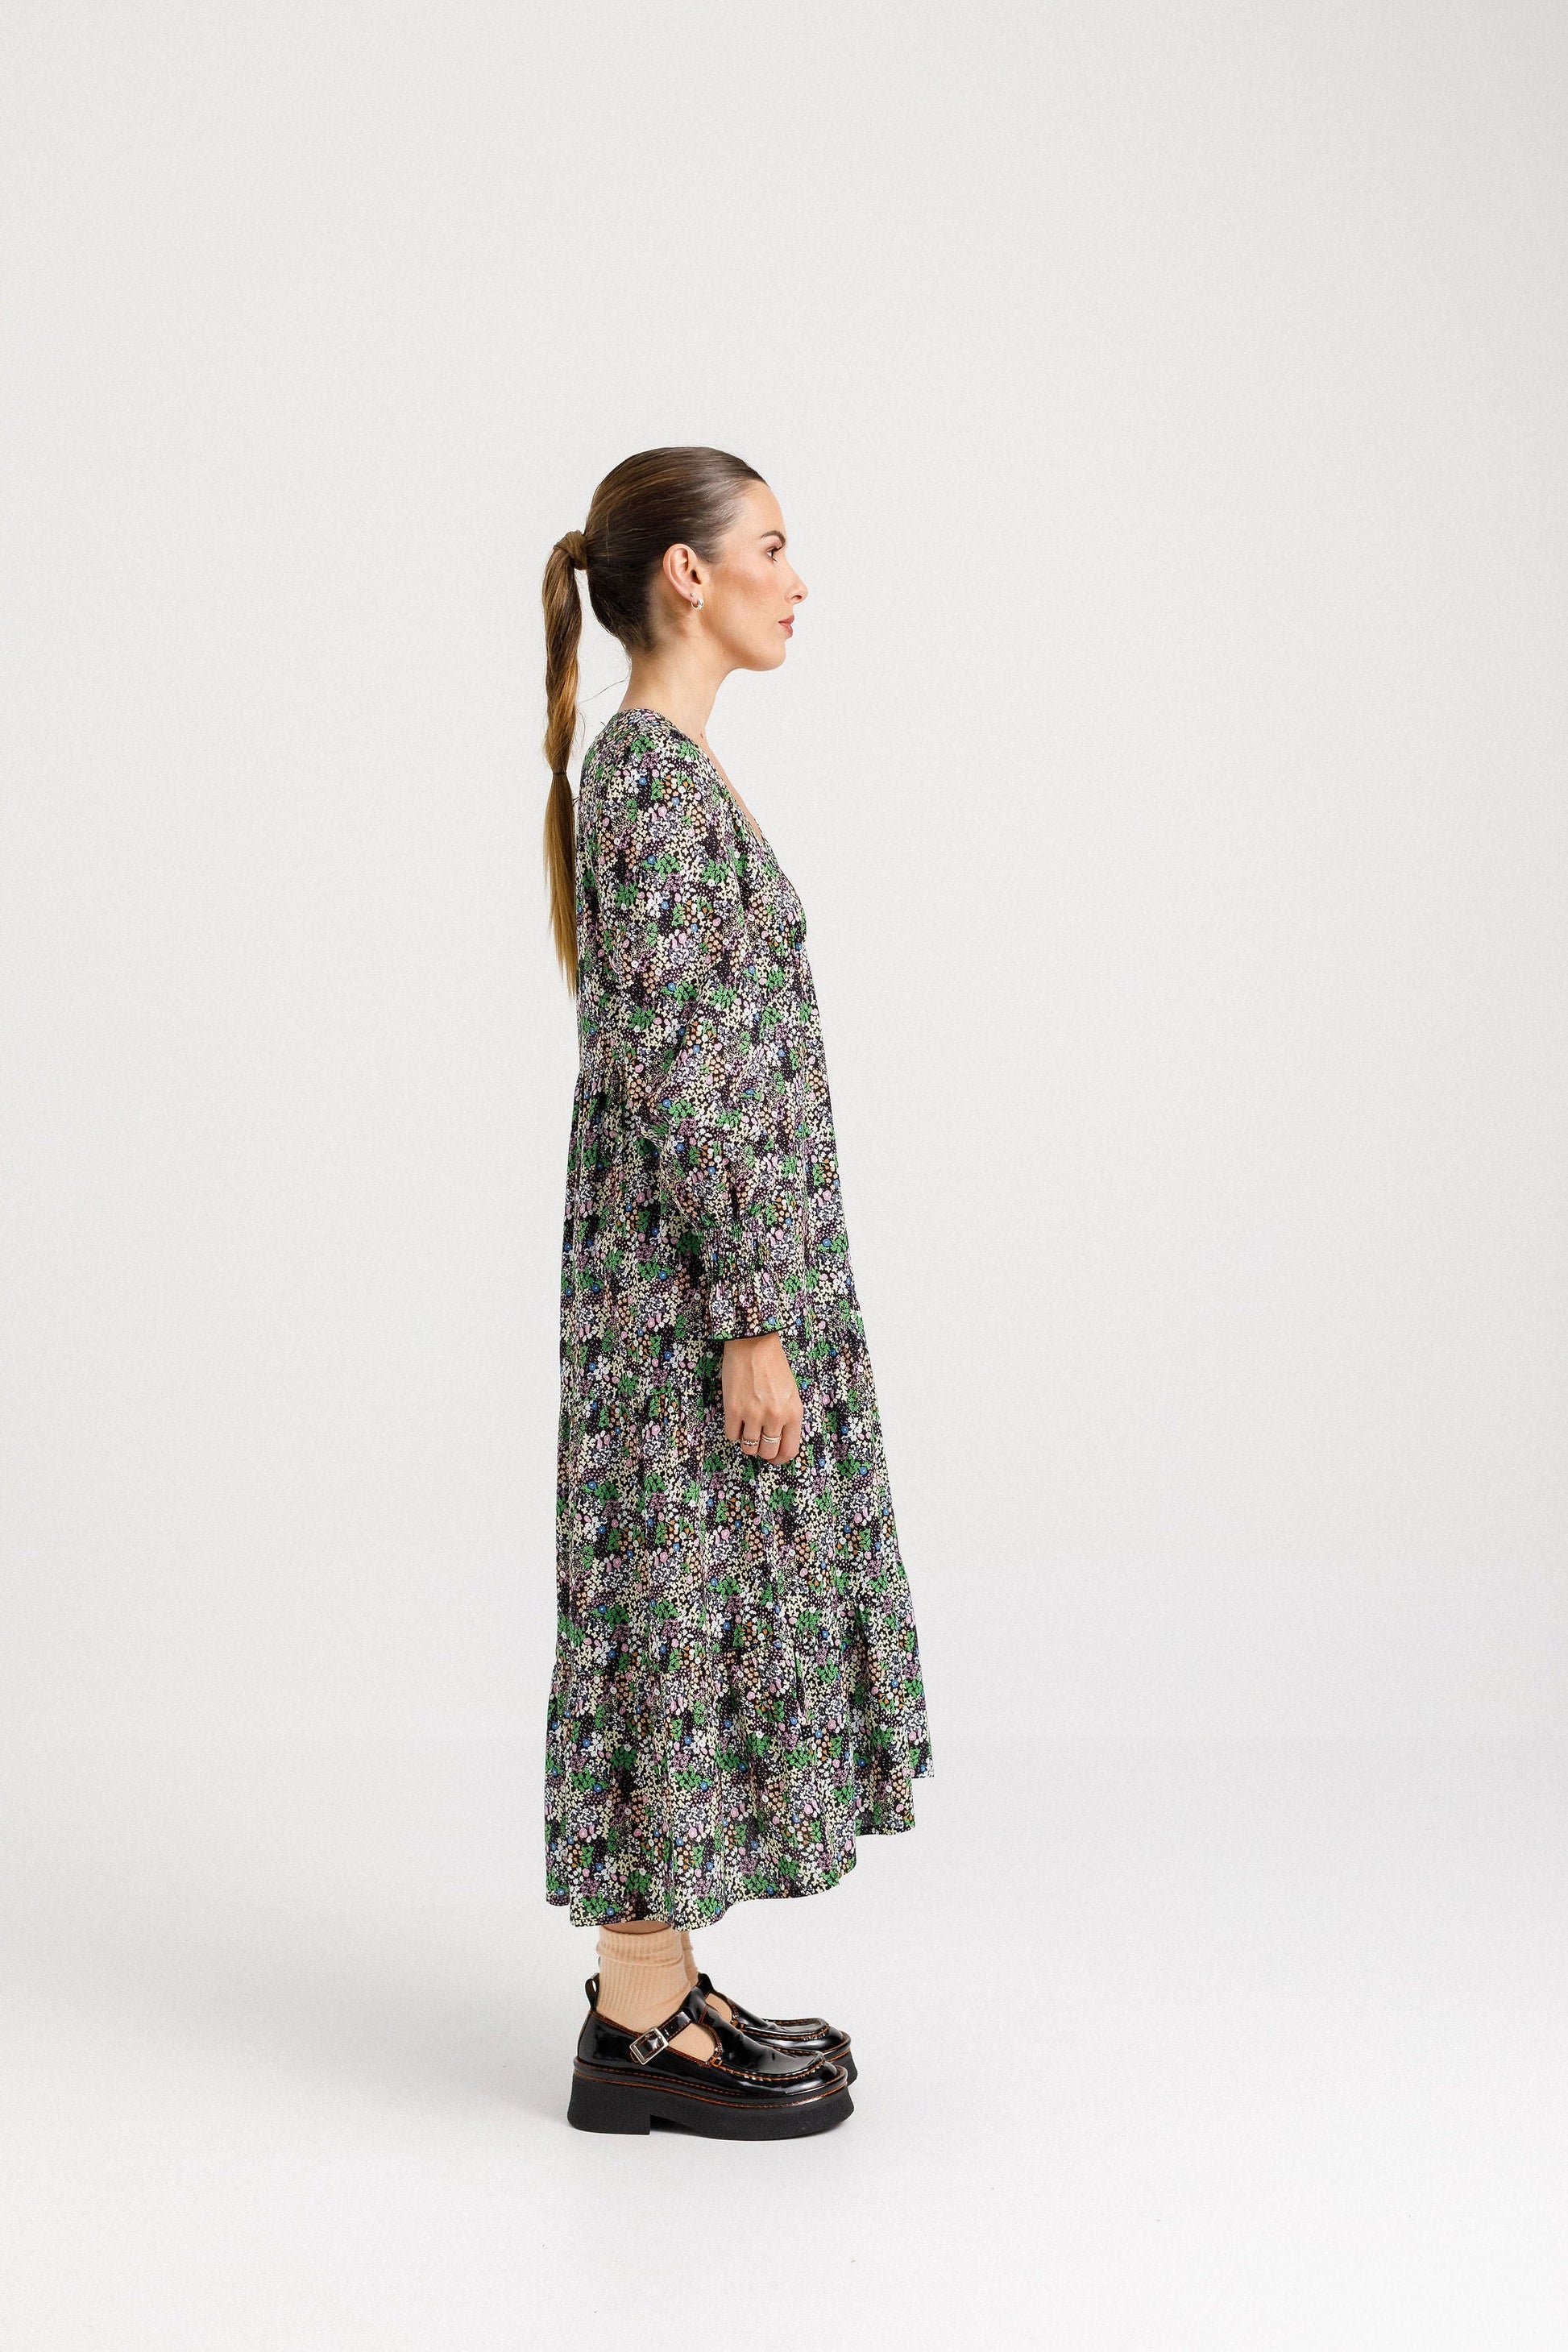 THING THING HAPPINESS DRESS - BLOOMY - THE VOGUE STORE